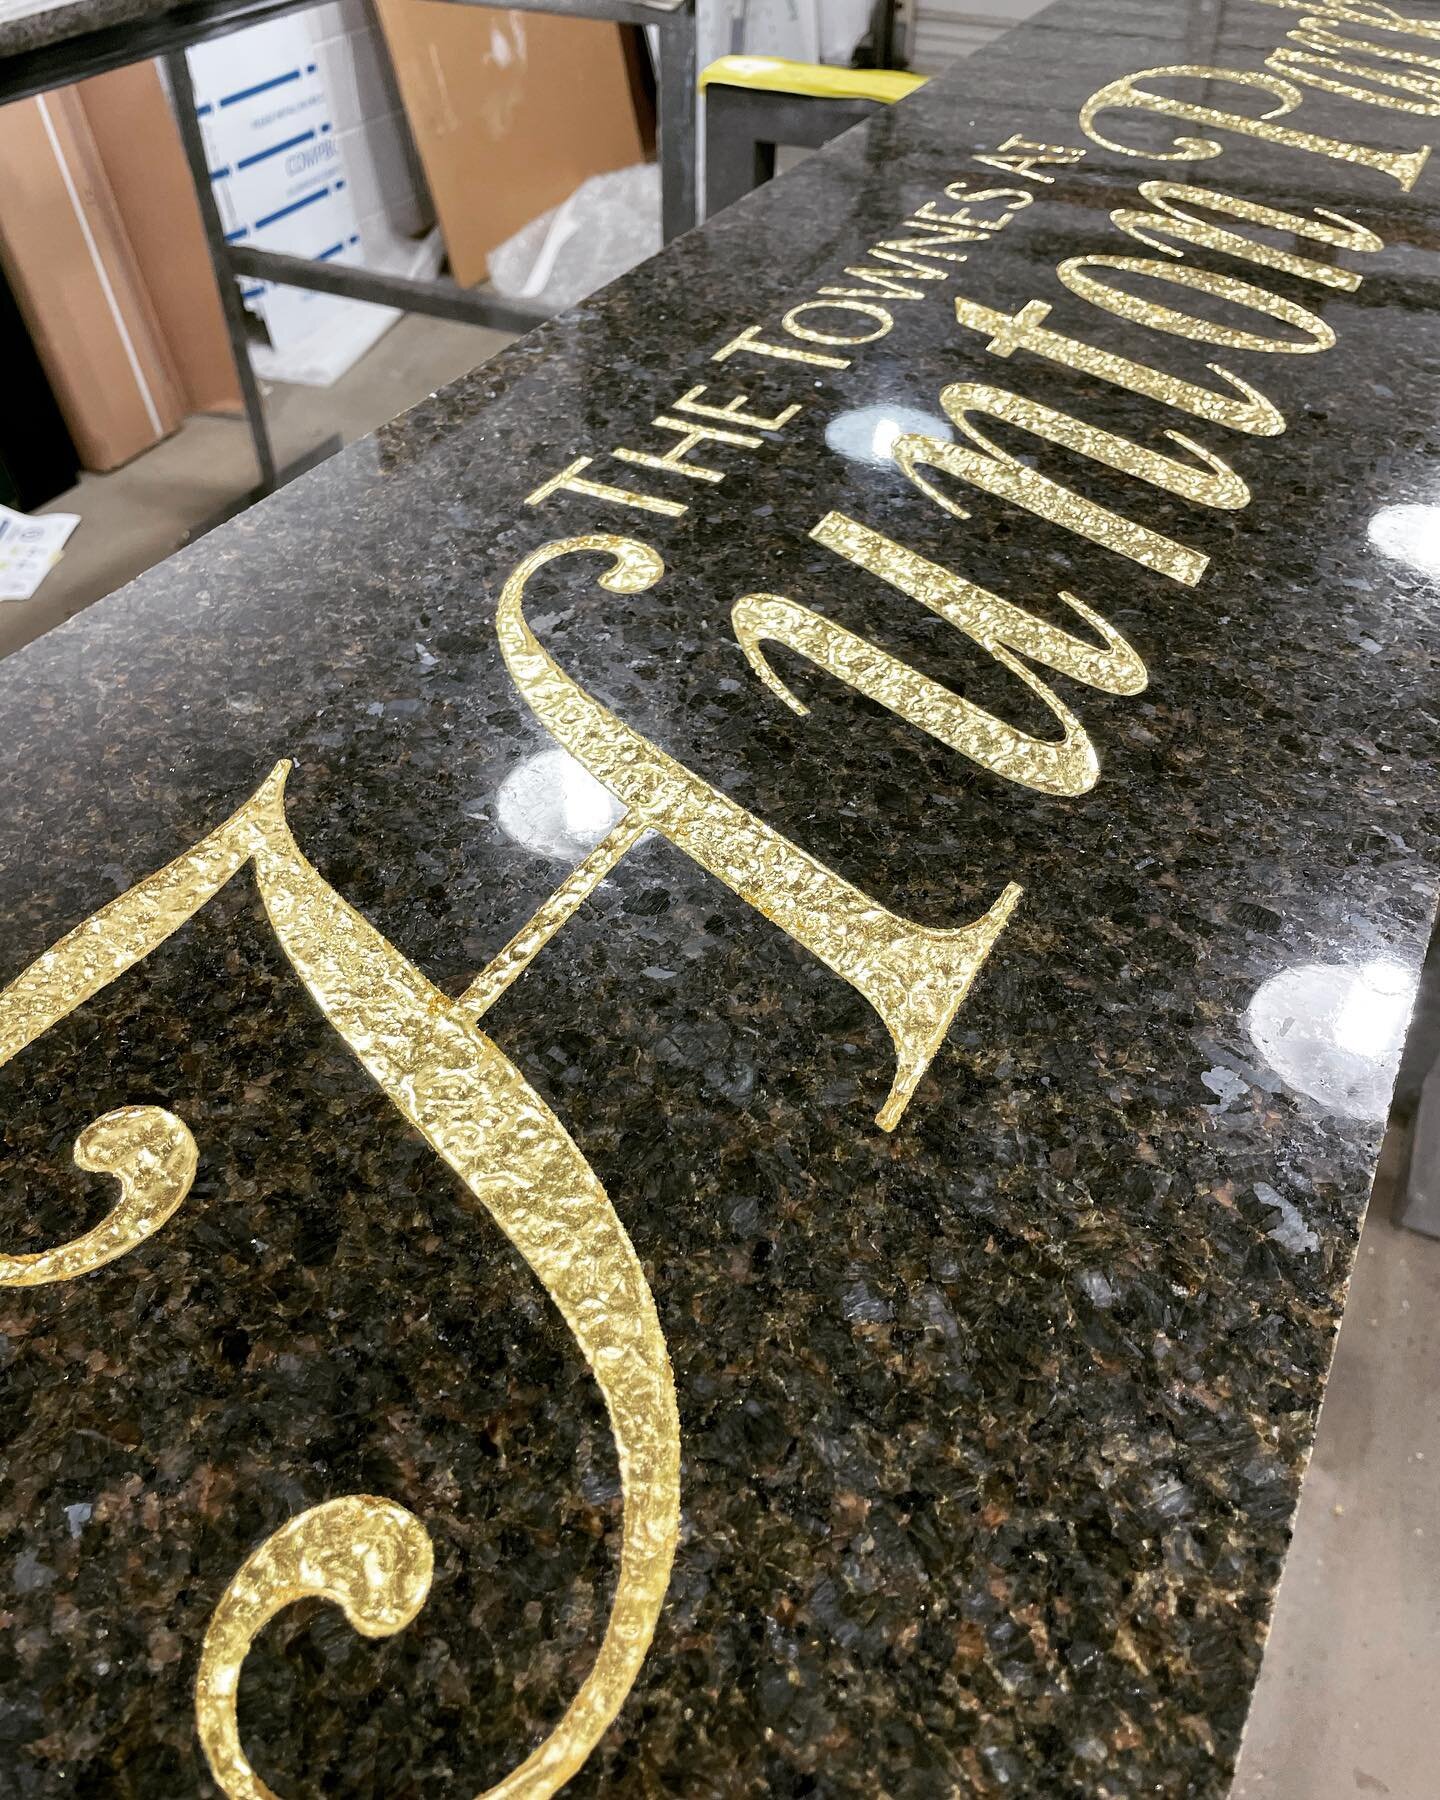 Sandblasted granite and slate with applied 23kt gold leaf&hellip;these signs will outlast all of us.  #signs #rvasigns #customsigns #signmaker #goldleaf #granite #slate #aluminum